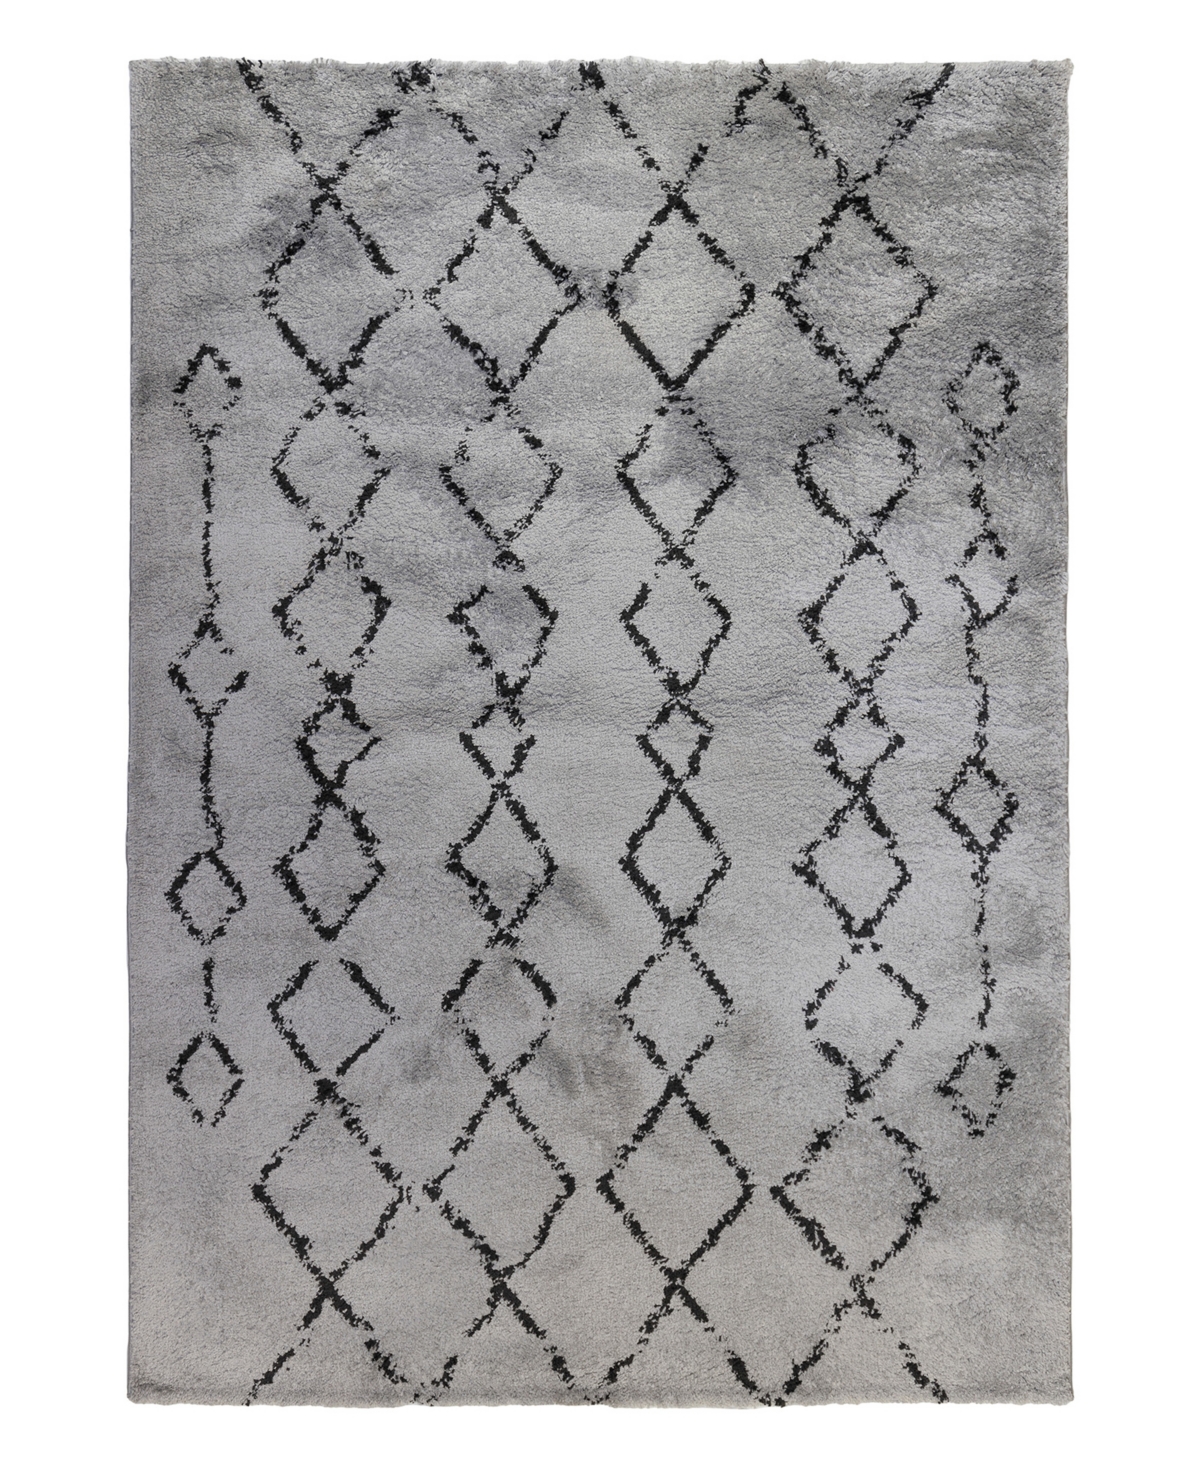 Amer Rugs Asp4 7'6" X 9'6" Area Rug In Gray/black